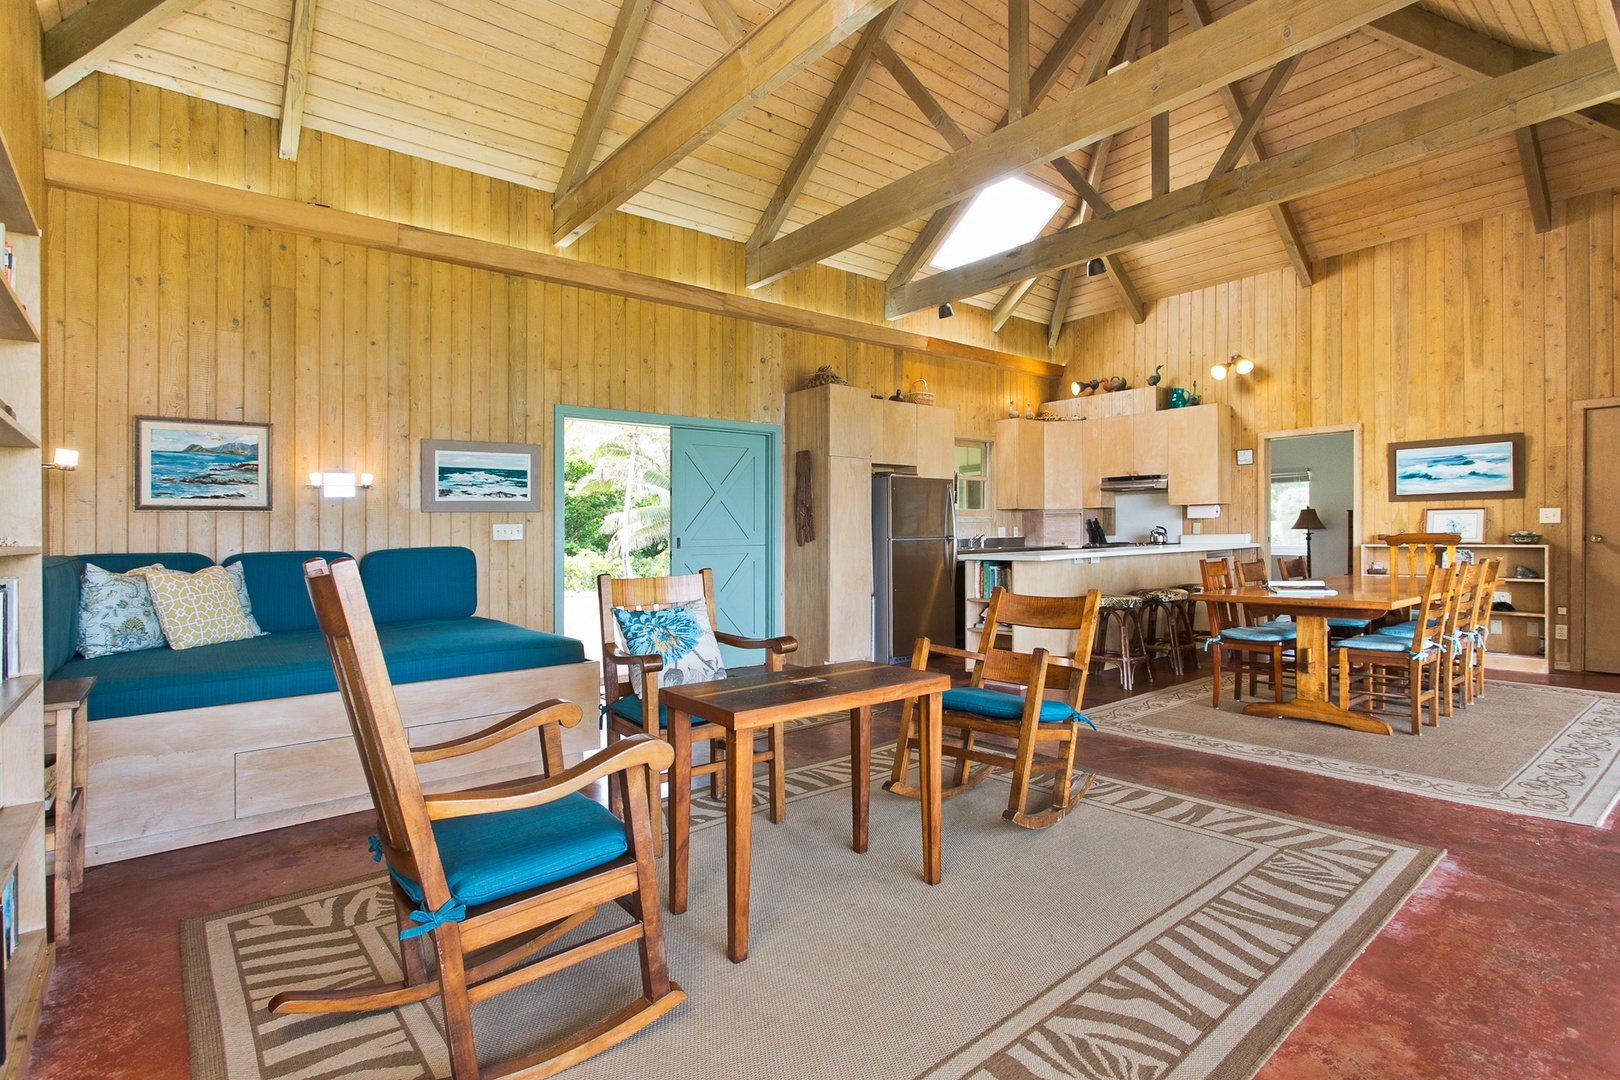 Laie Vacation Rentals, Waipuna Hale - Family gathering room.